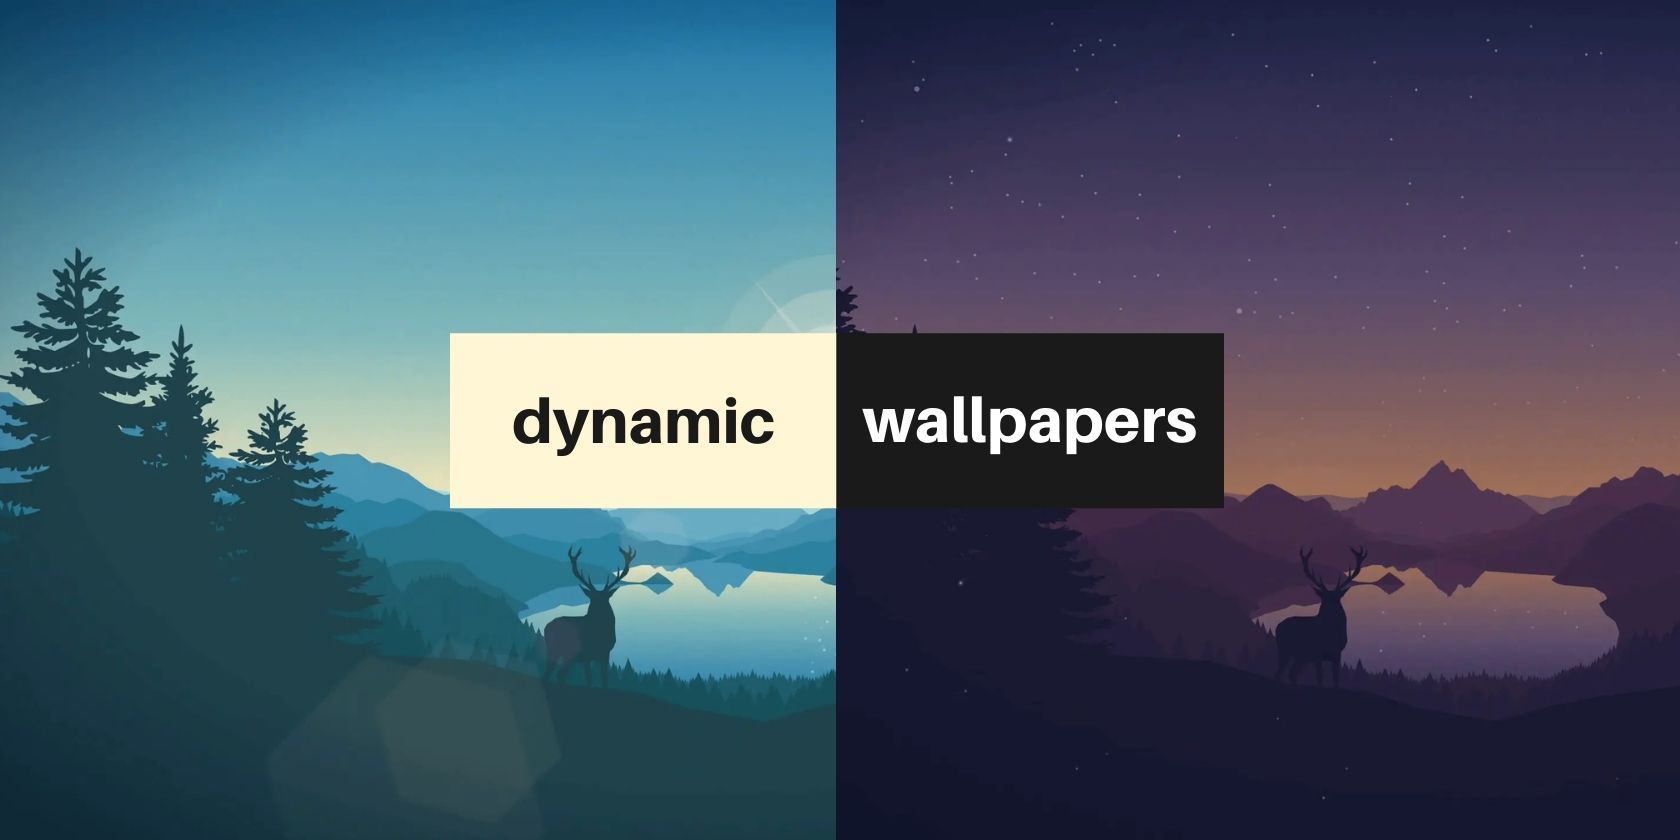 Make Your Linux Desktop Look Beautiful With Dynamic Wallpaper